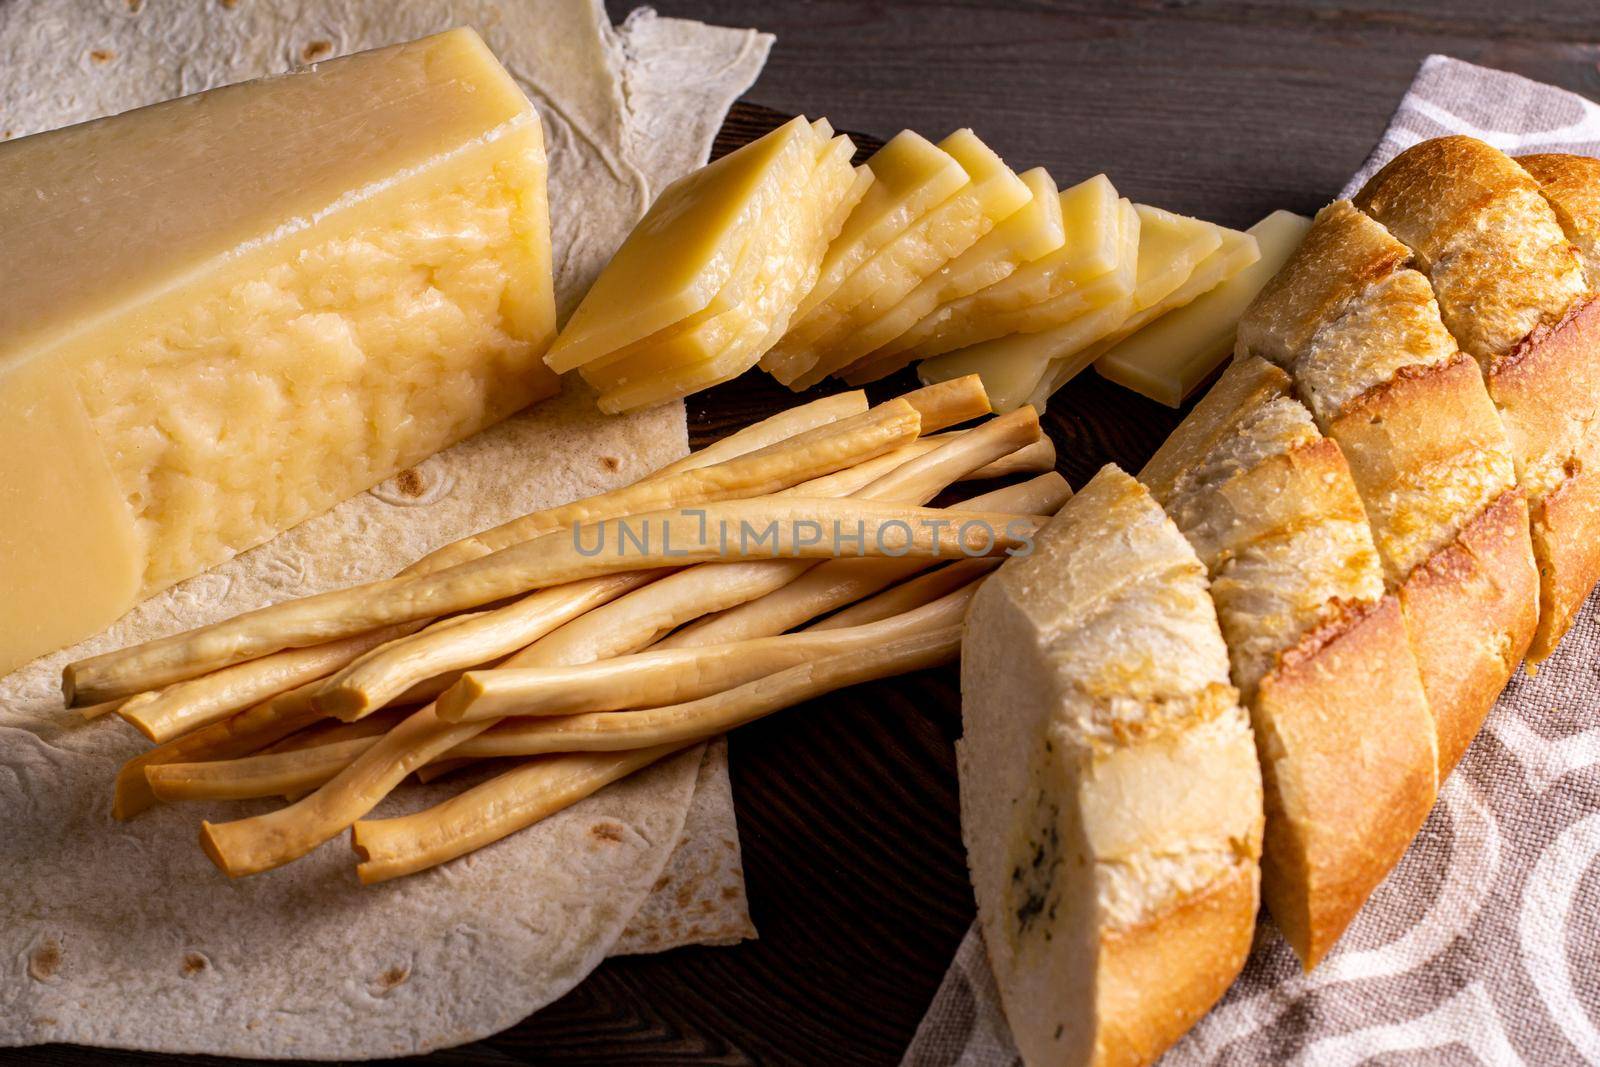 hard cheese and fibrous cheese with slices of bread are cut on a wooden board